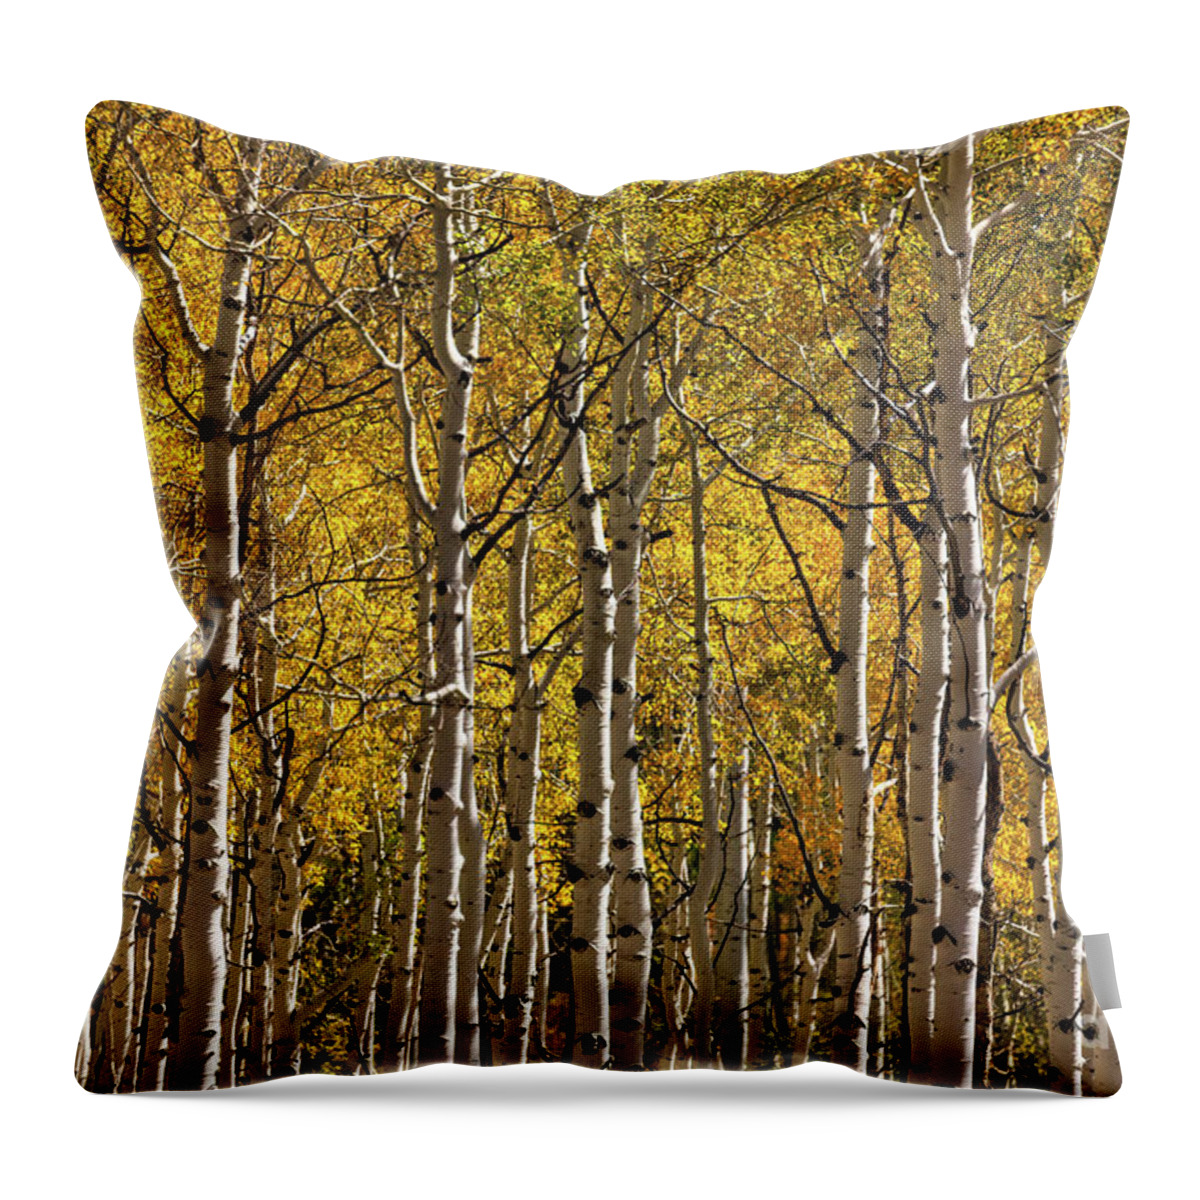 Colorado Throw Pillow featuring the photograph In The Thick Of Aspen by Doug Sturgess